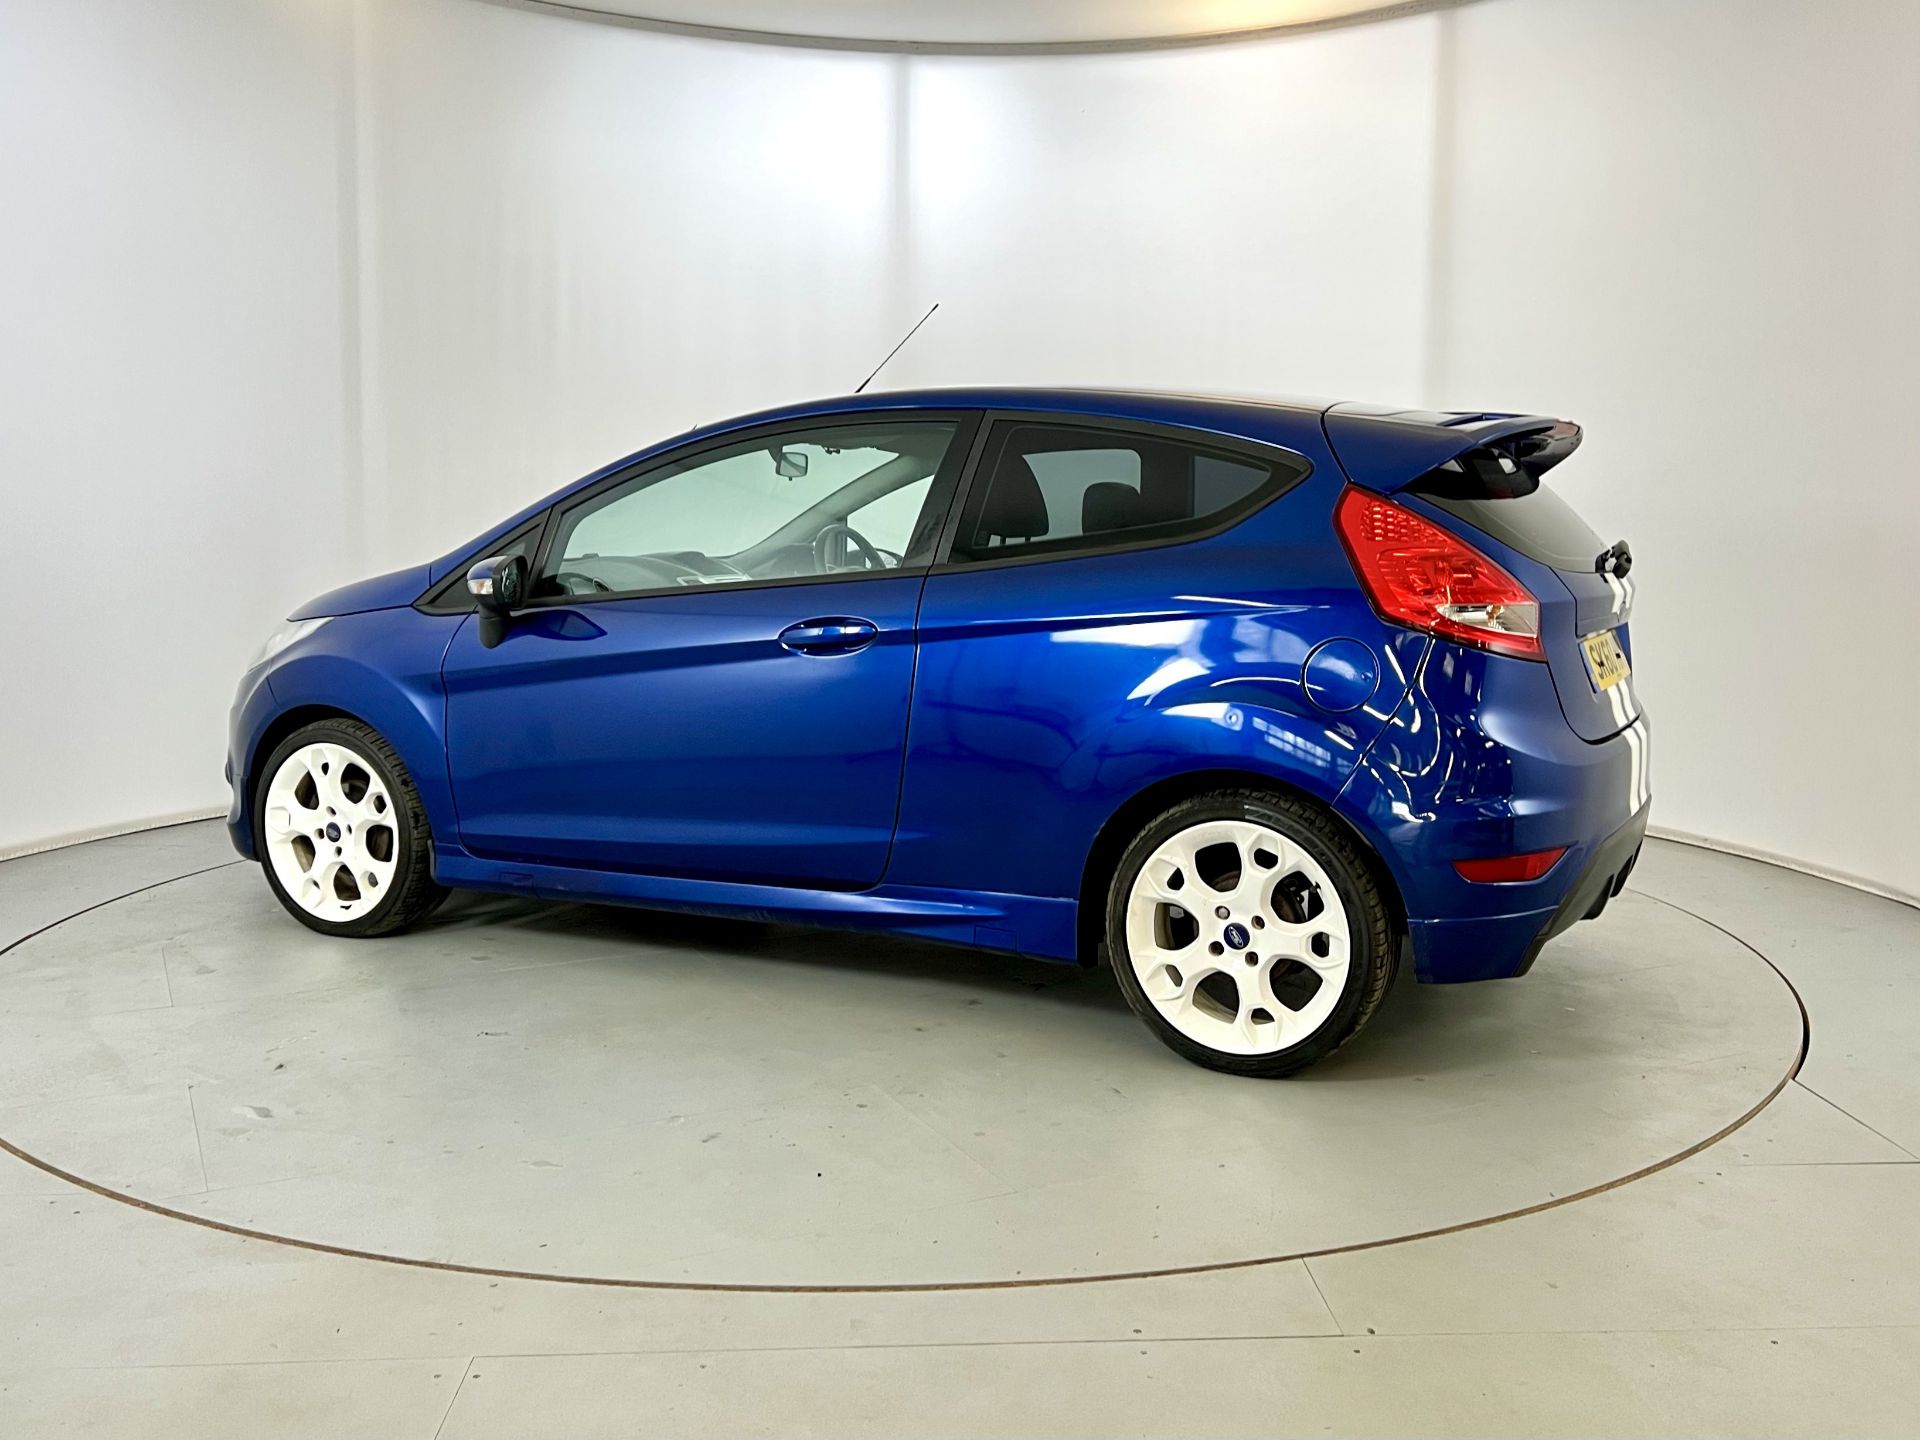 Ford Fiesta S1600 - Image 6 of 30